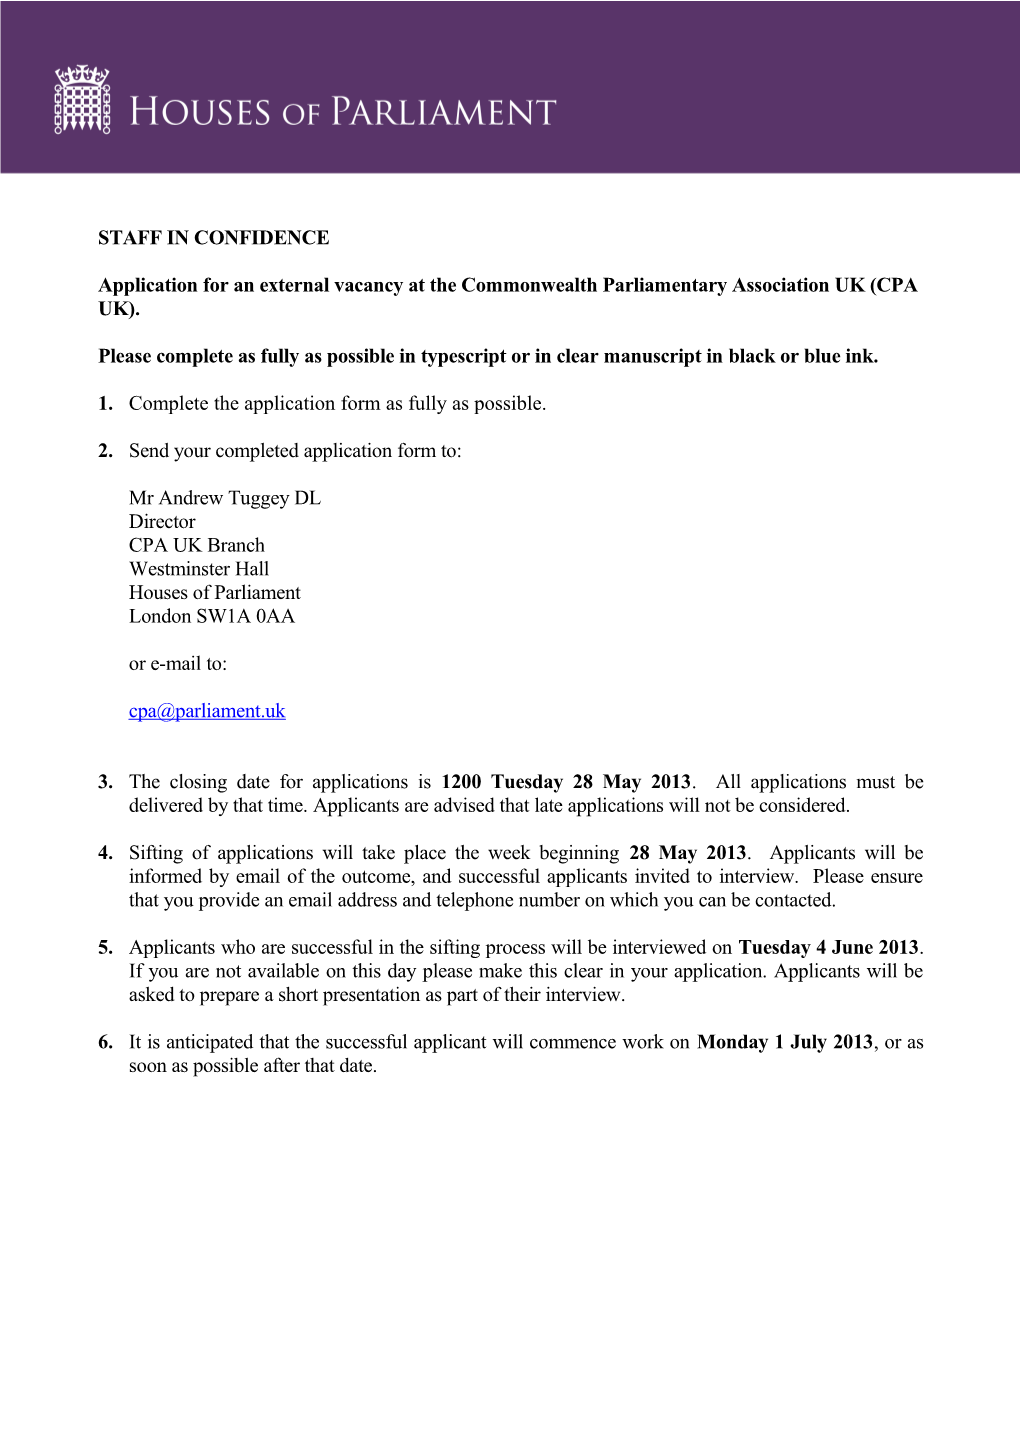 Application for an External Vacancy at the Commonwealth Parliamentary Association UK (CPA UK)